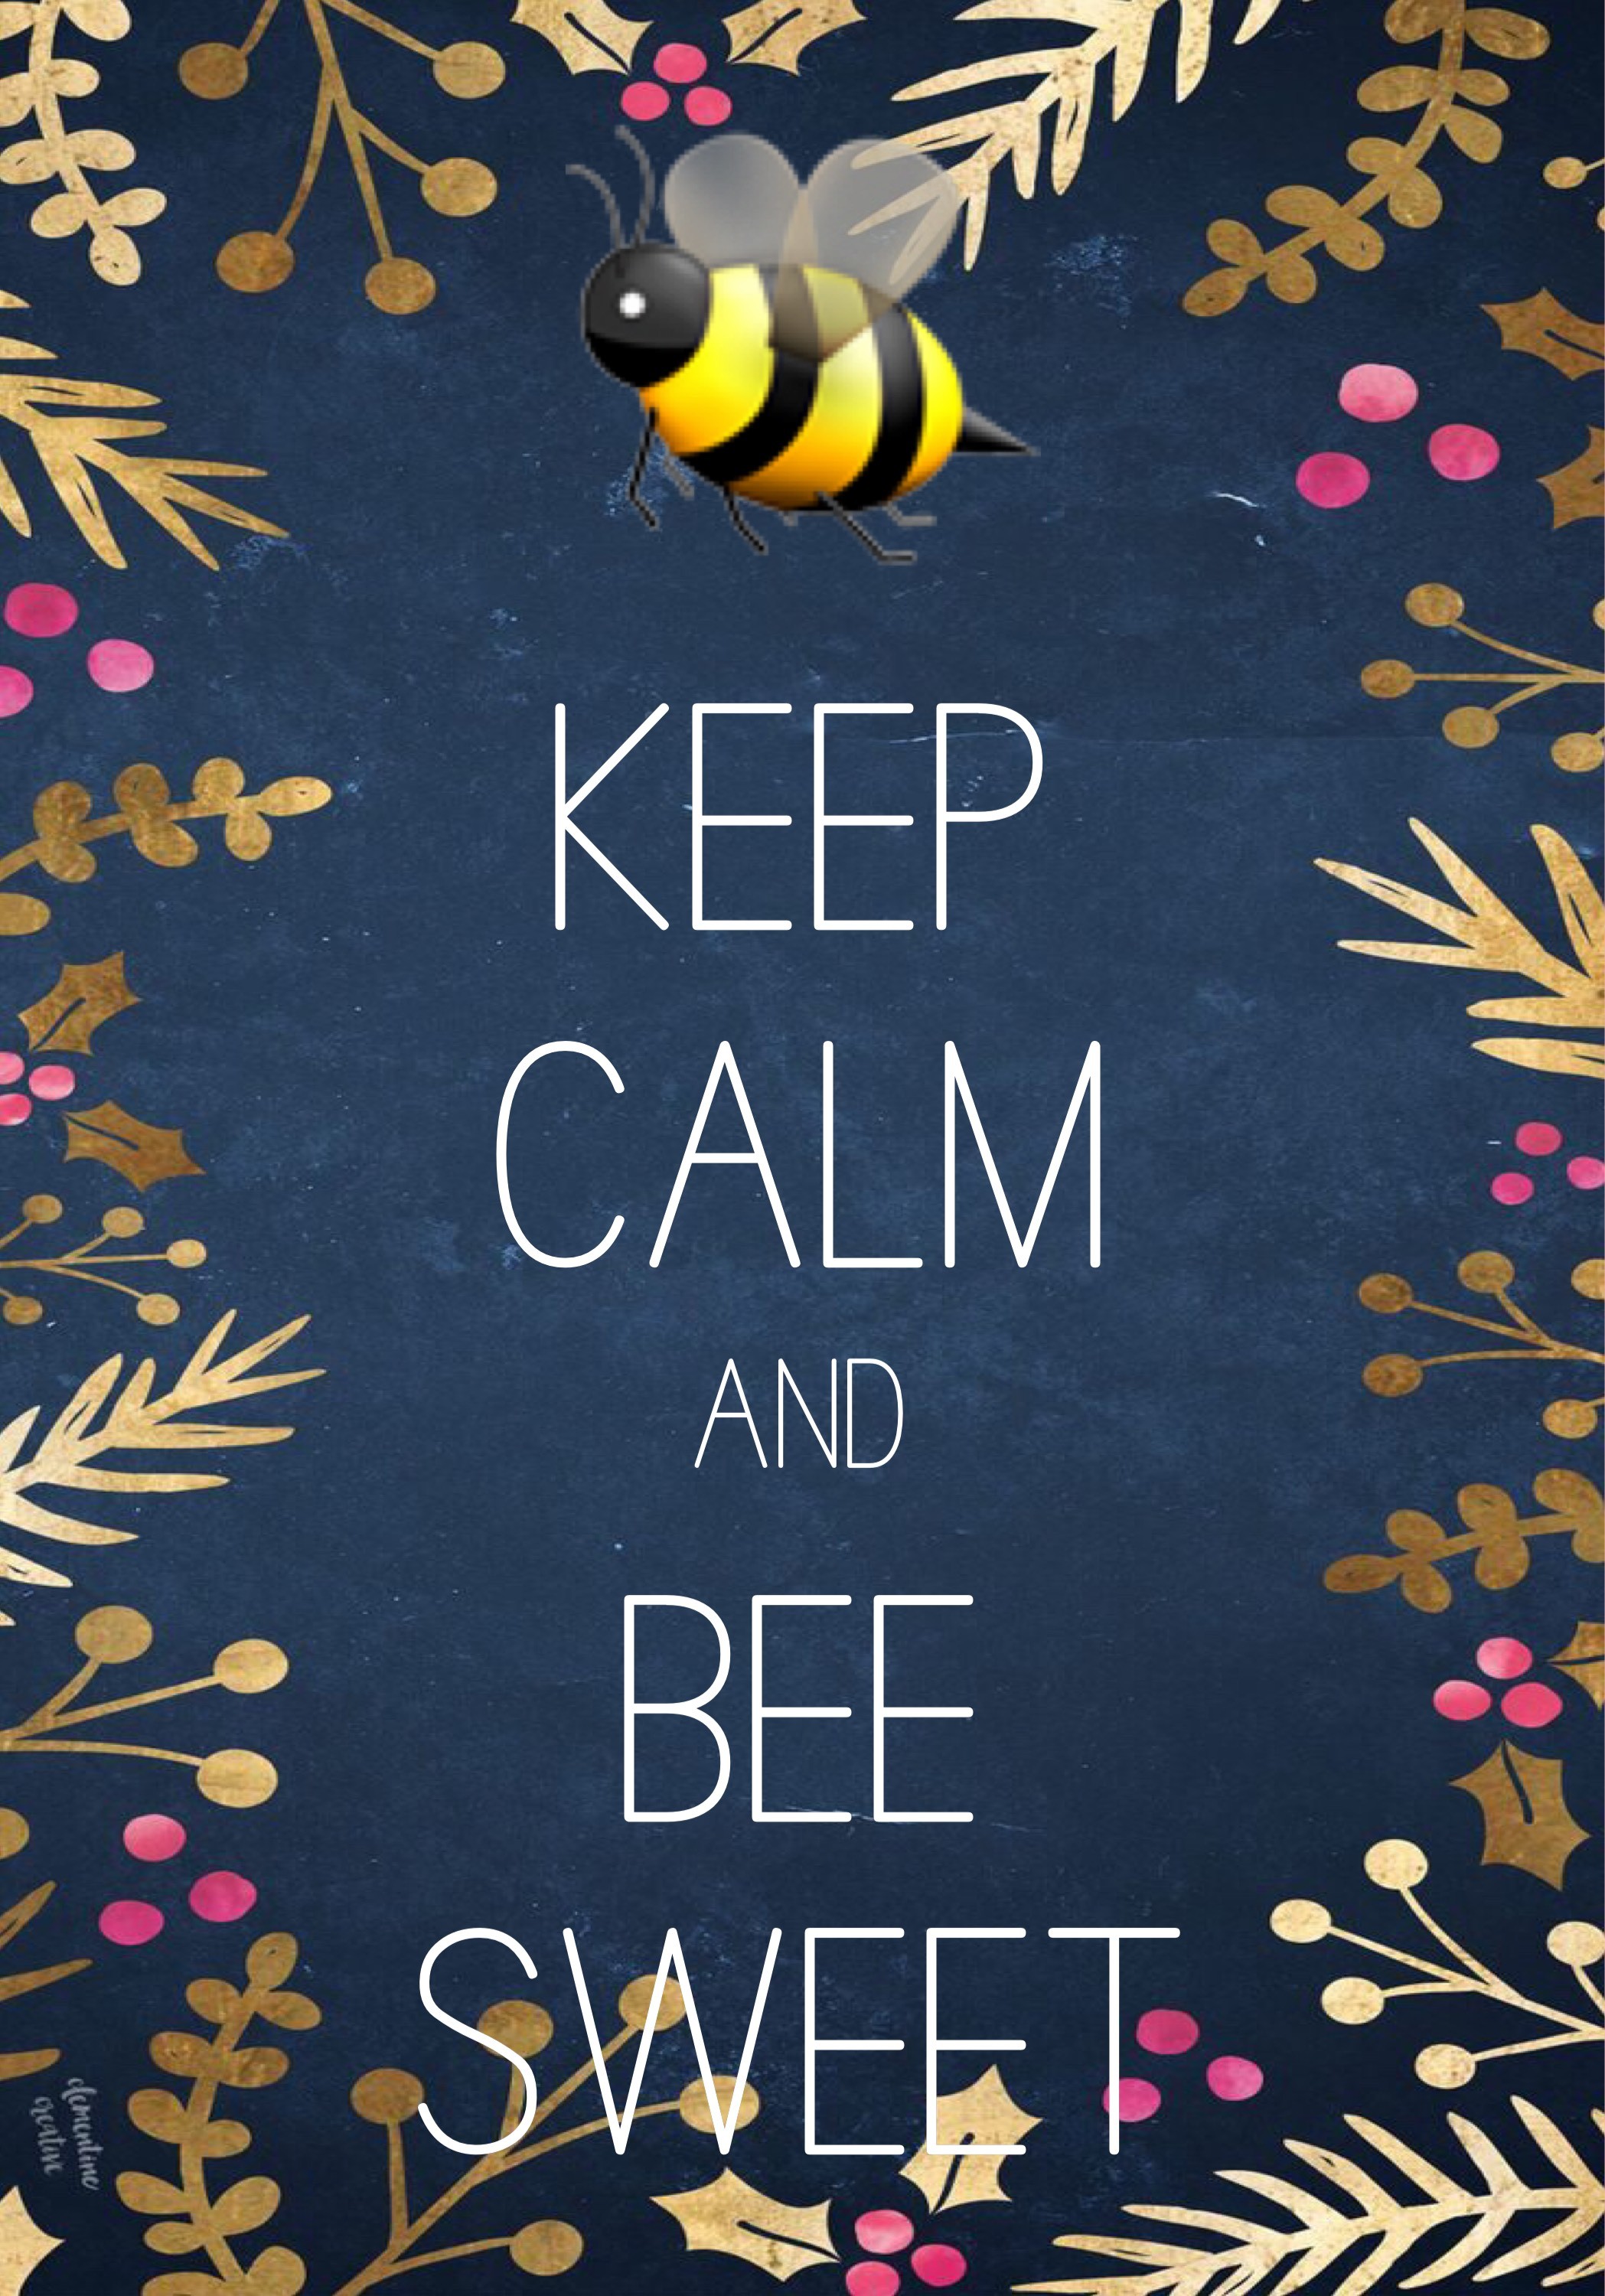 Keep calm and bee sweet made with Keep Calm and Carry On for iOS #keepcalm